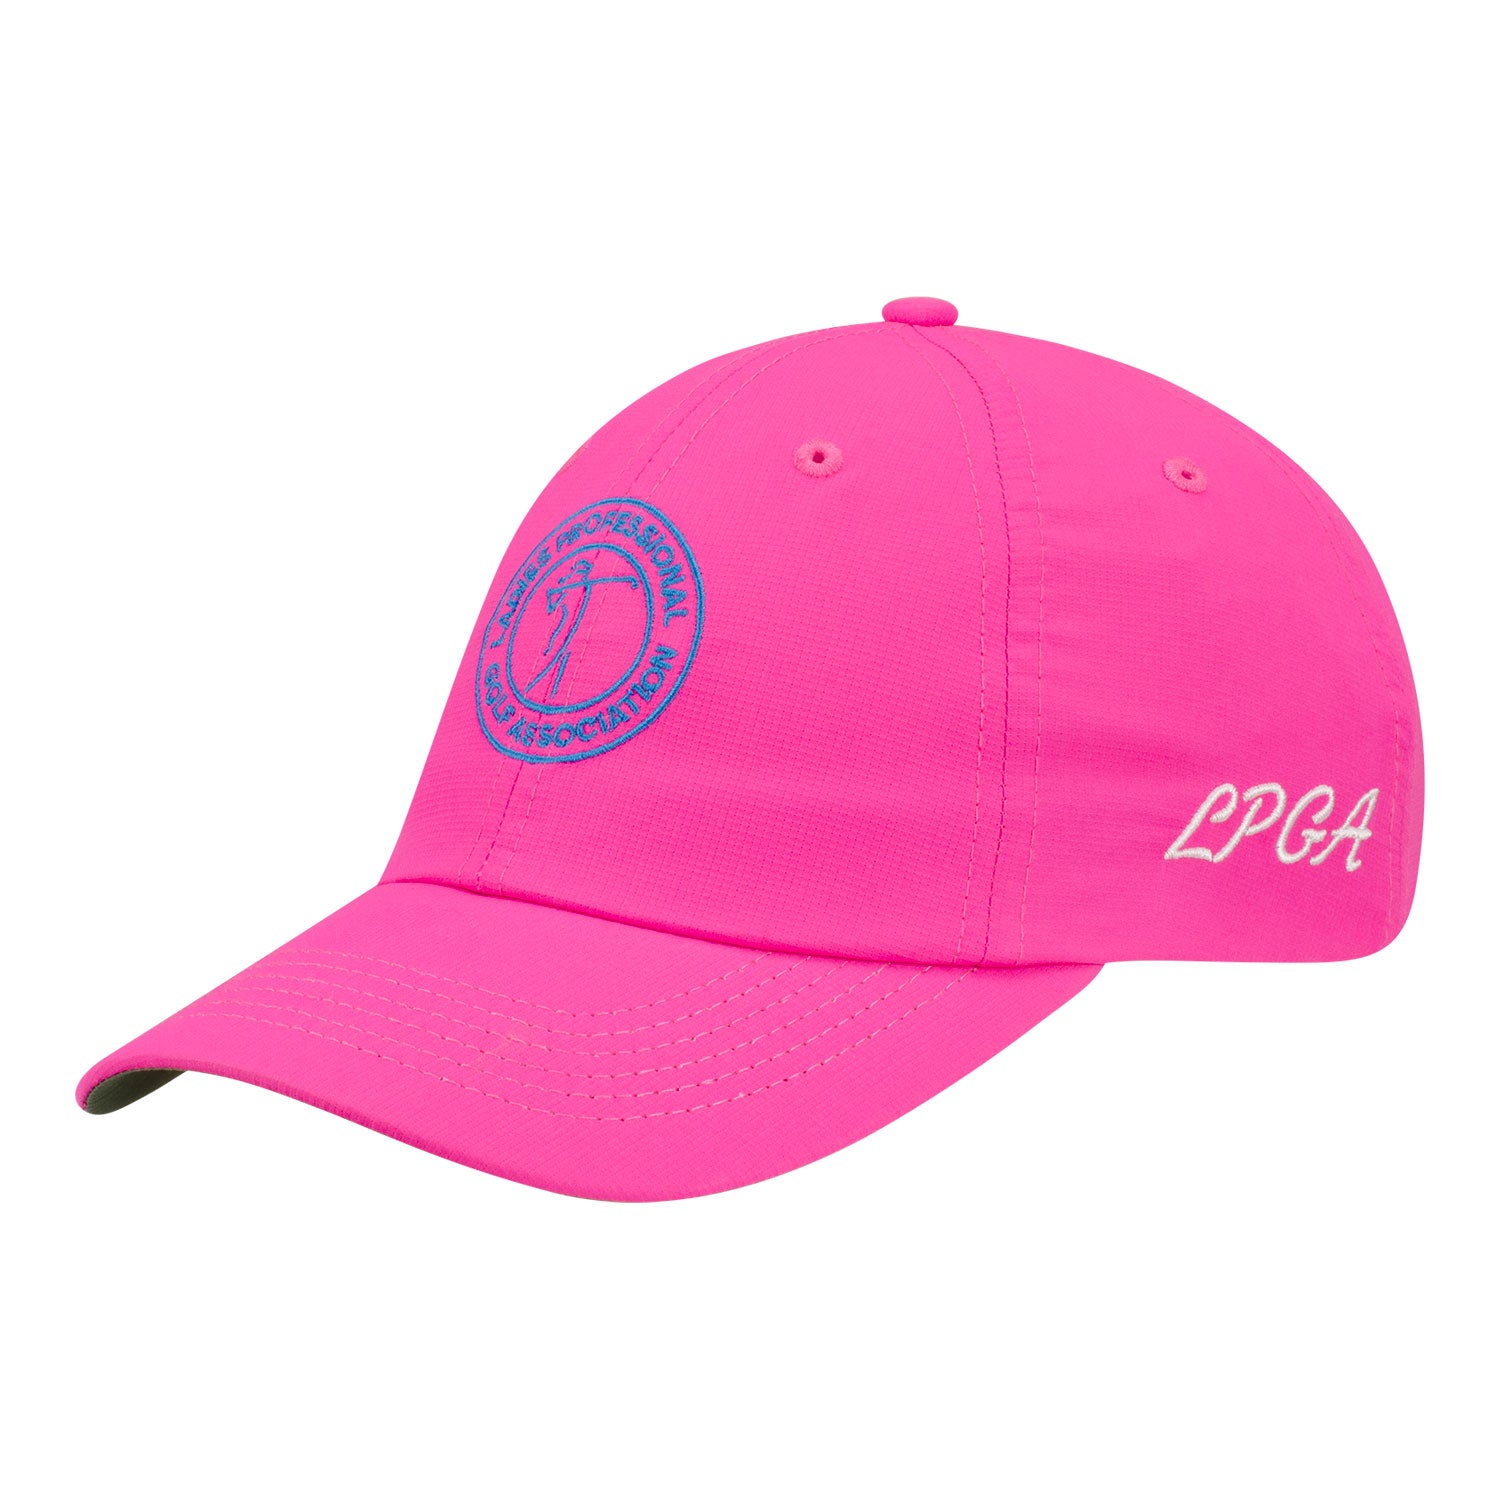 Imperial LPGA Women's Hat in Pink - Angled Left Side View